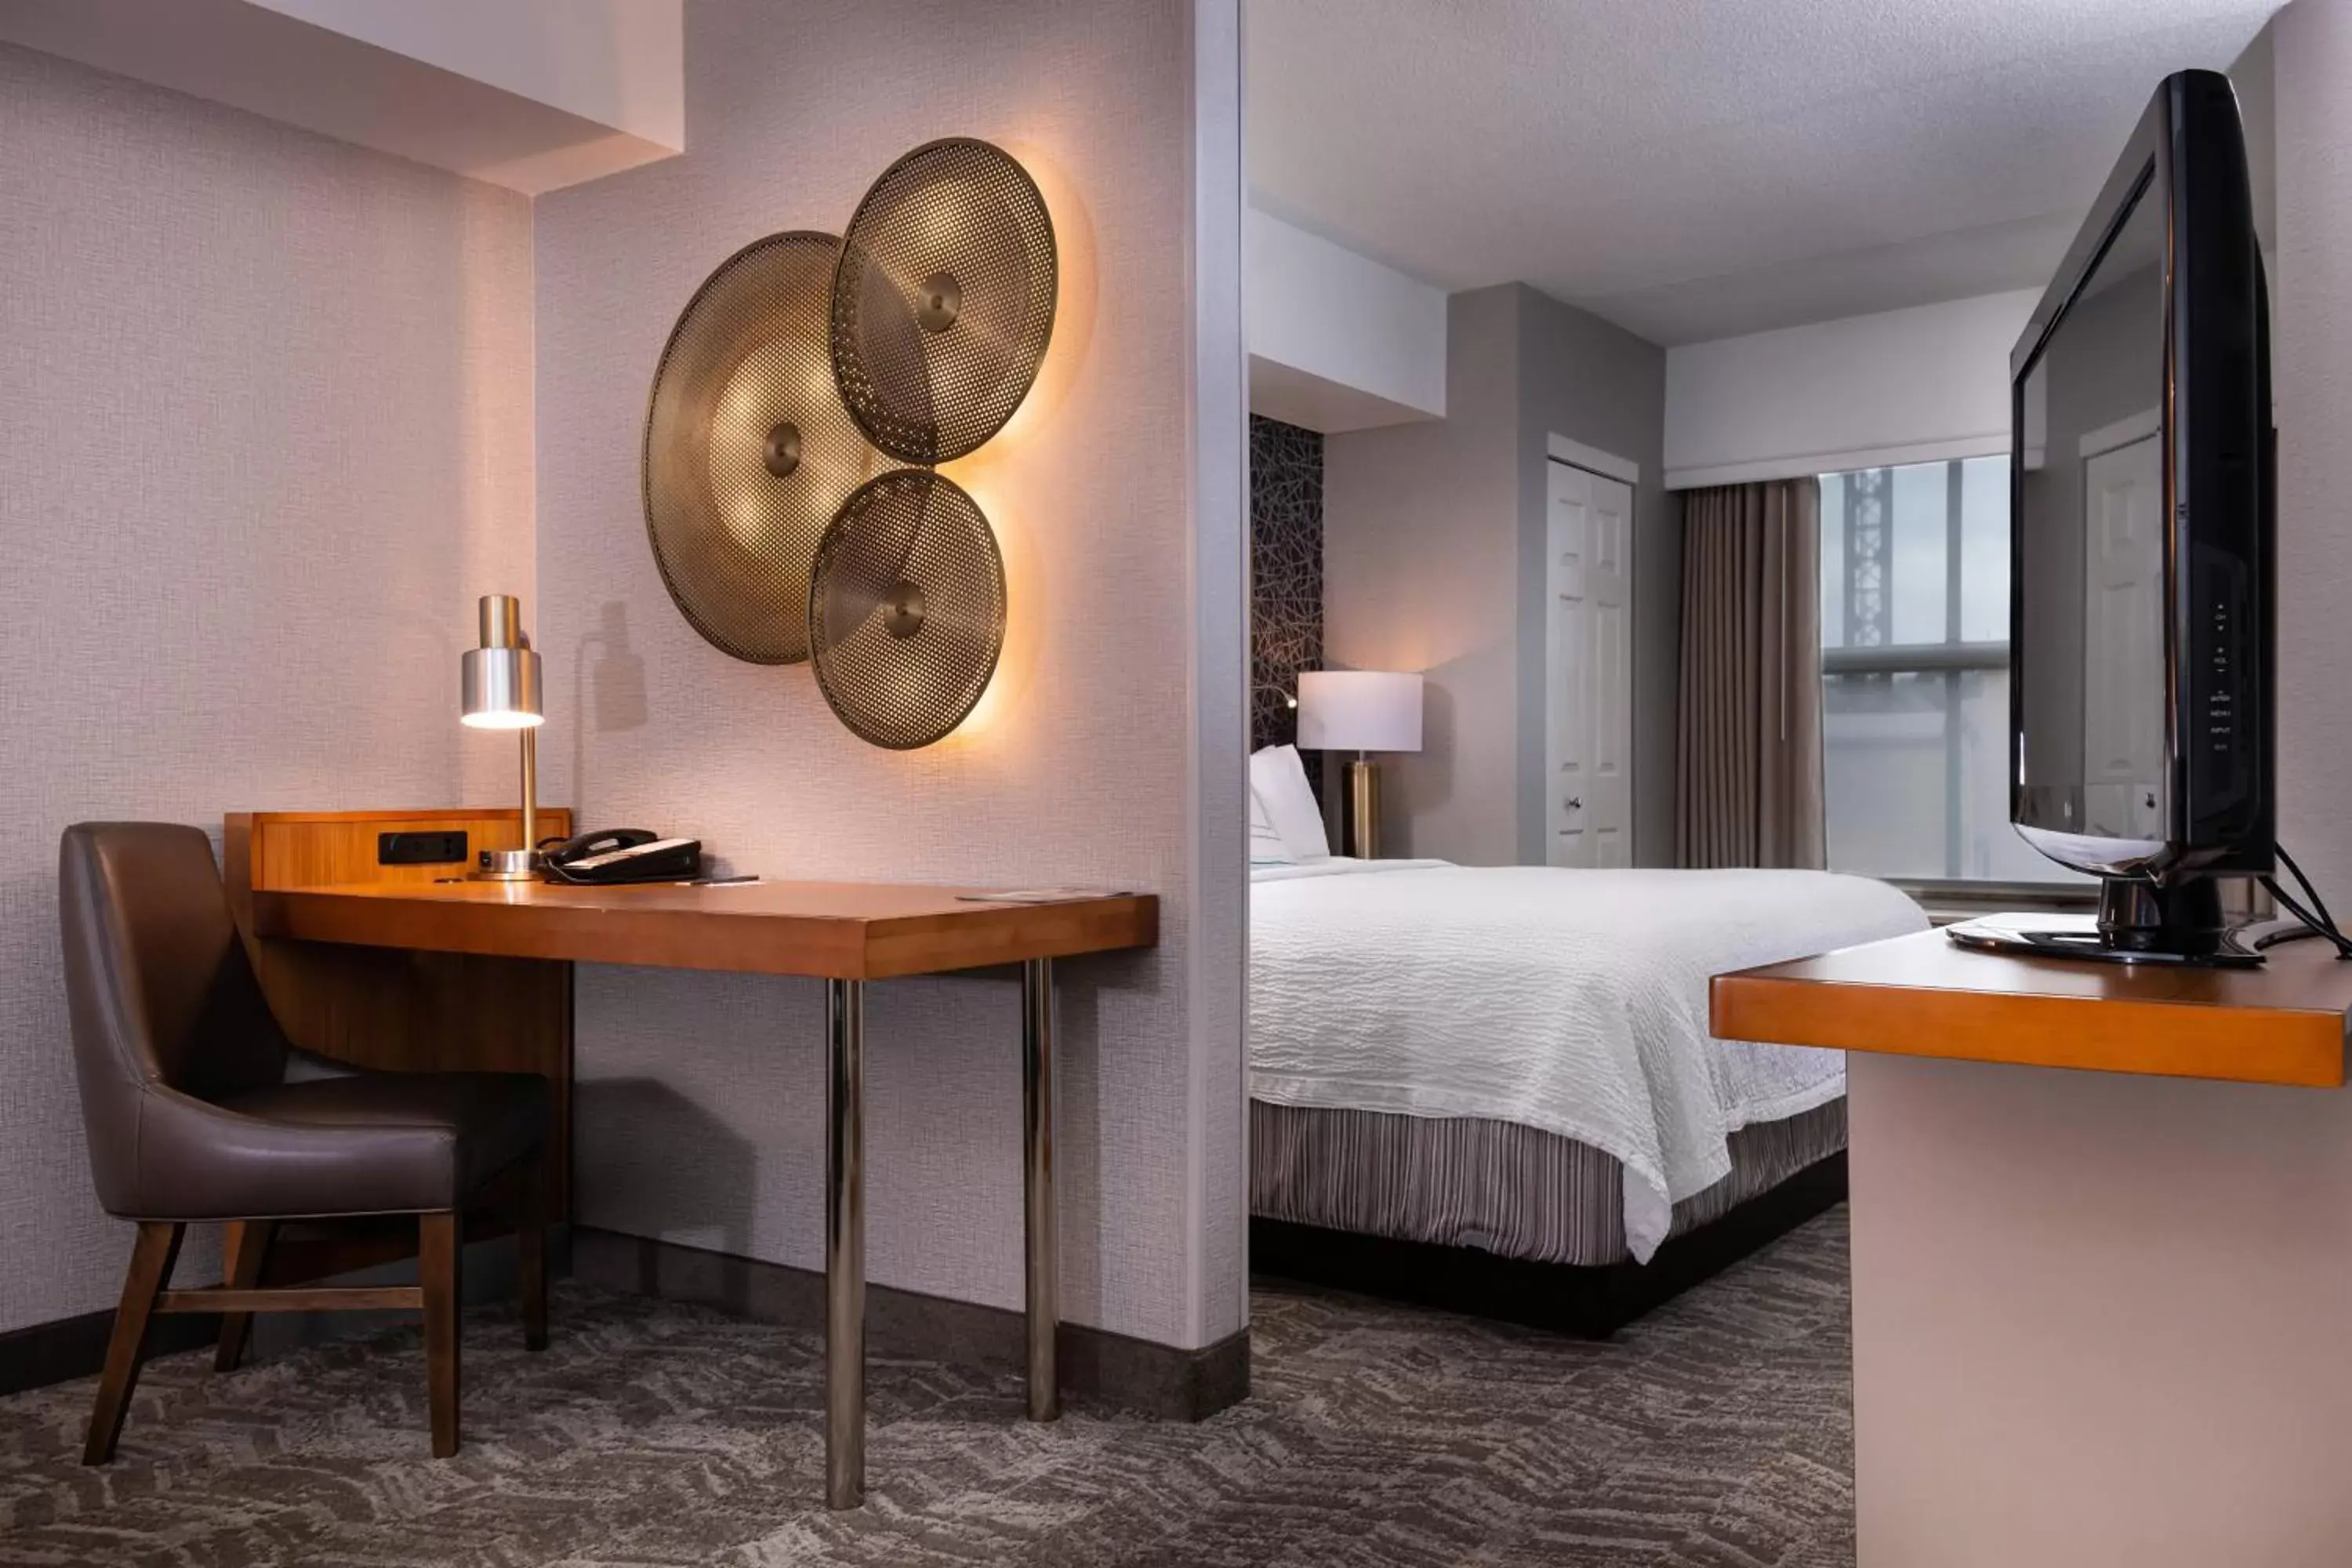 Bedroom, Bathroom in SpringHill Suites by Marriott Pittsburgh North Shore